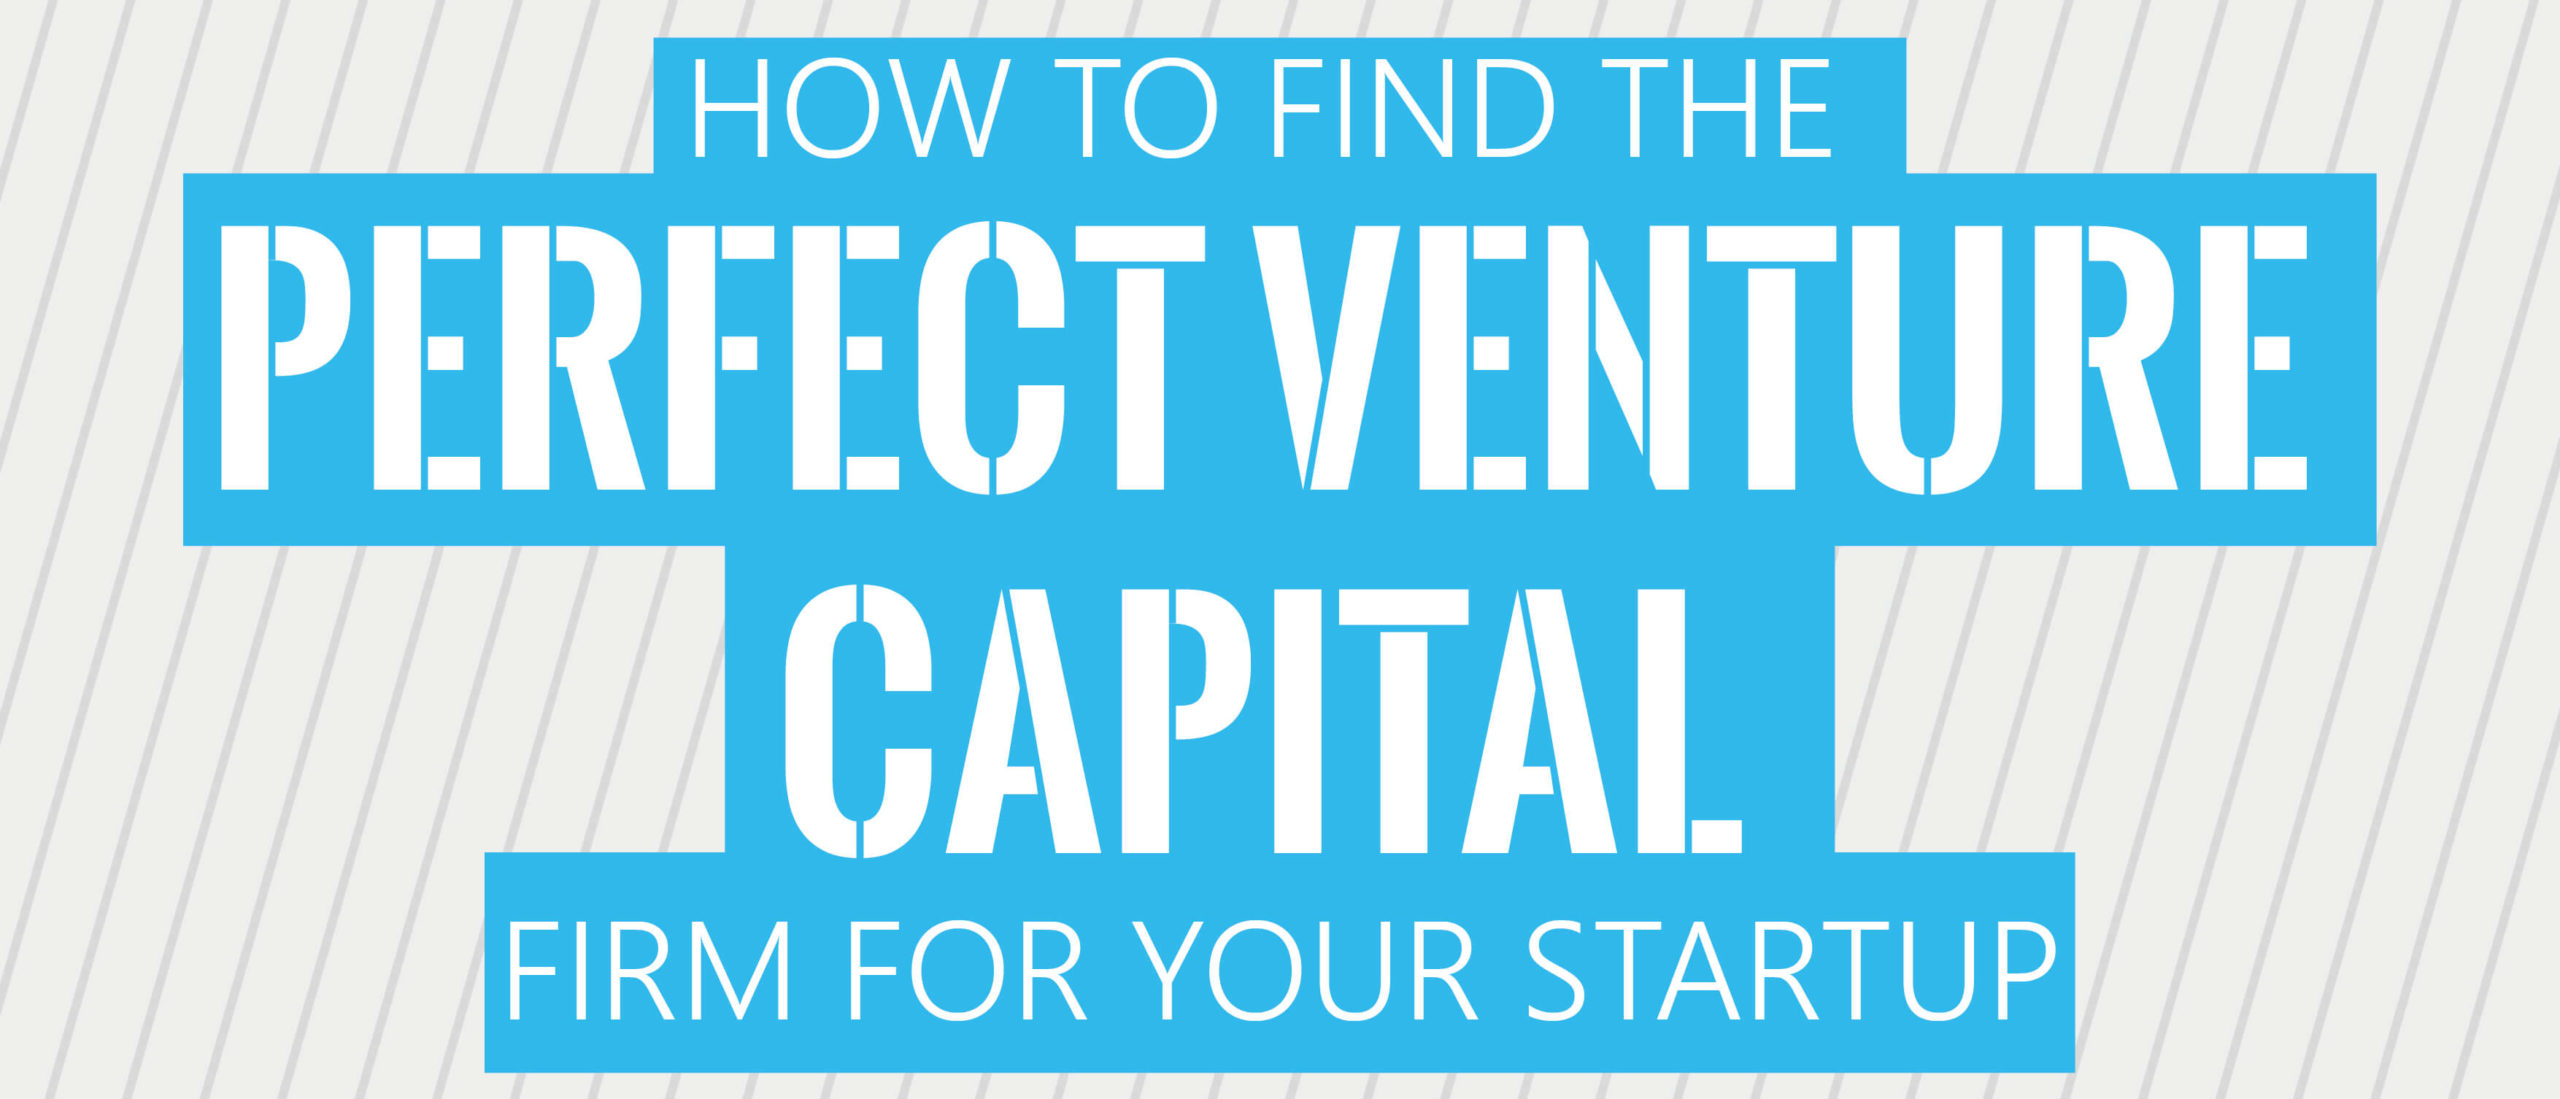 How_to_Find_the_Perfect_Venture_Capital_Firm_for_Your_Startup